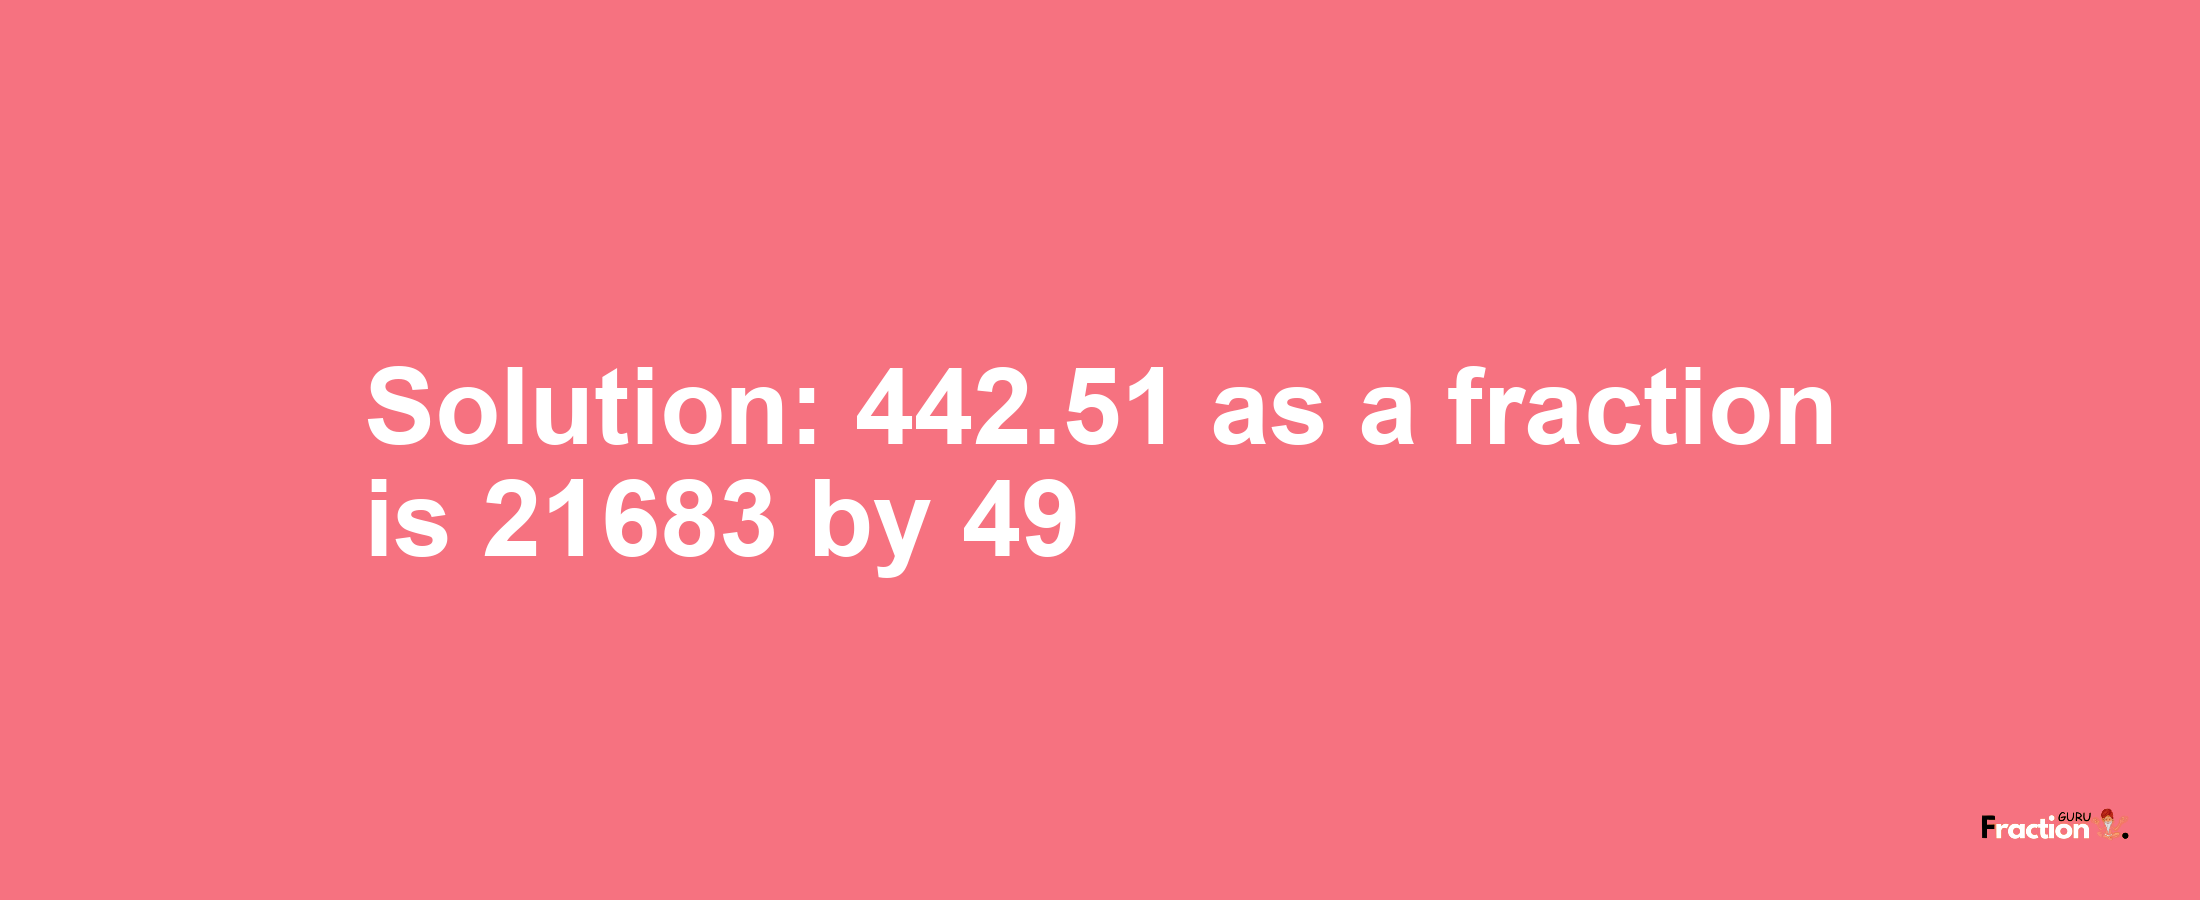 Solution:442.51 as a fraction is 21683/49